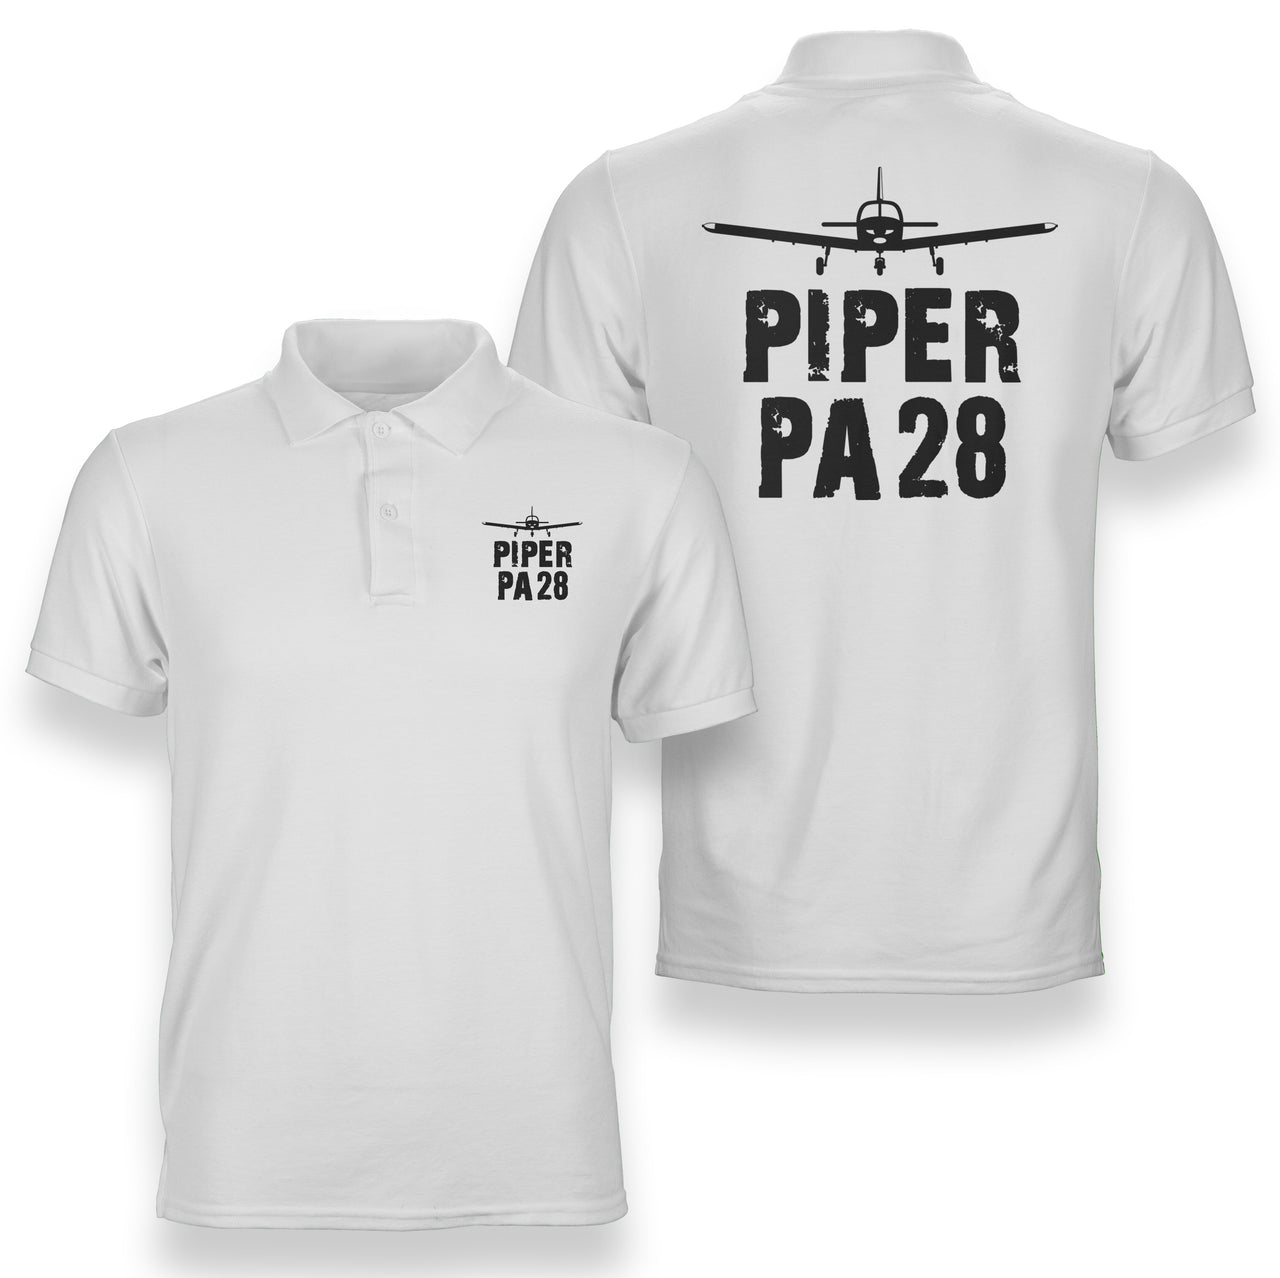 Piper PA28 & Plane Designed Double Side Polo T-Shirts